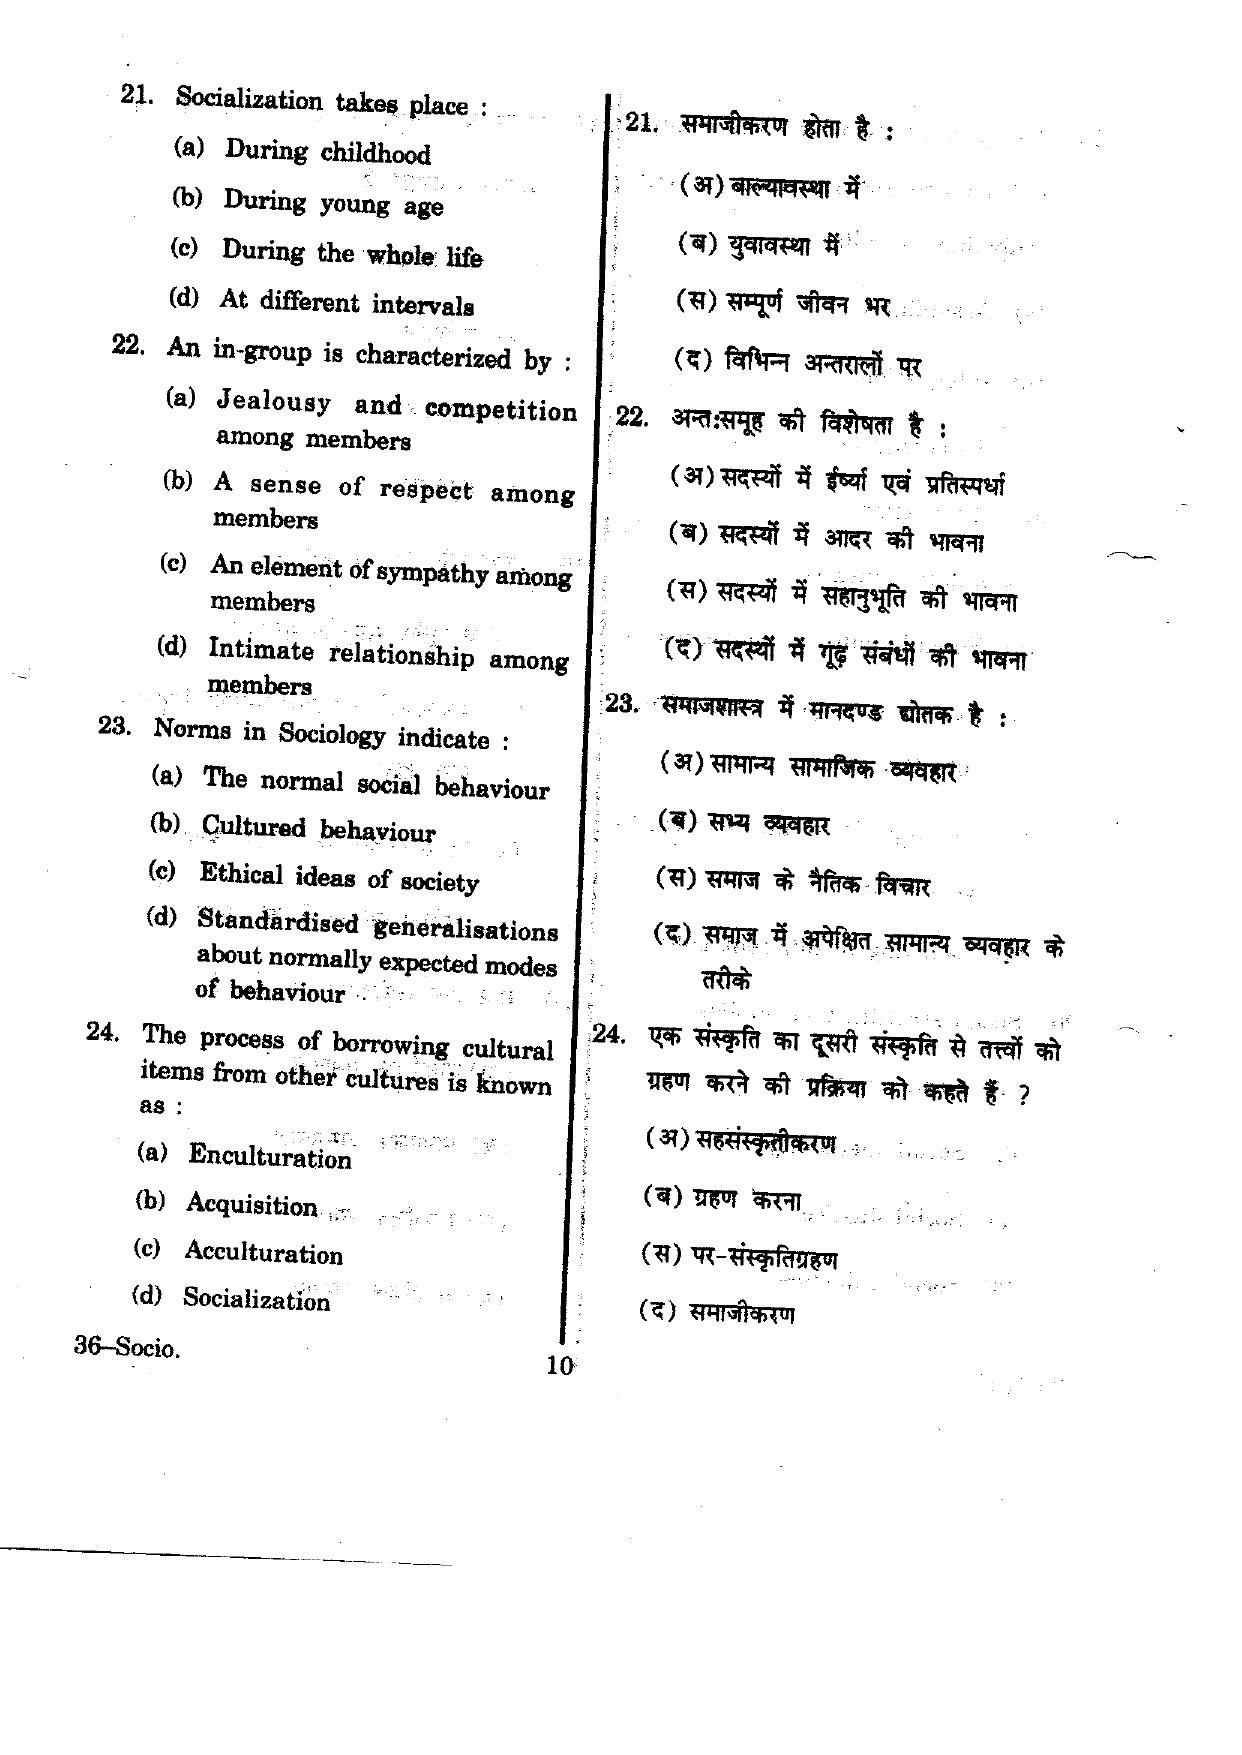 URATPG Sociology 2012 Question Paper - Page 10